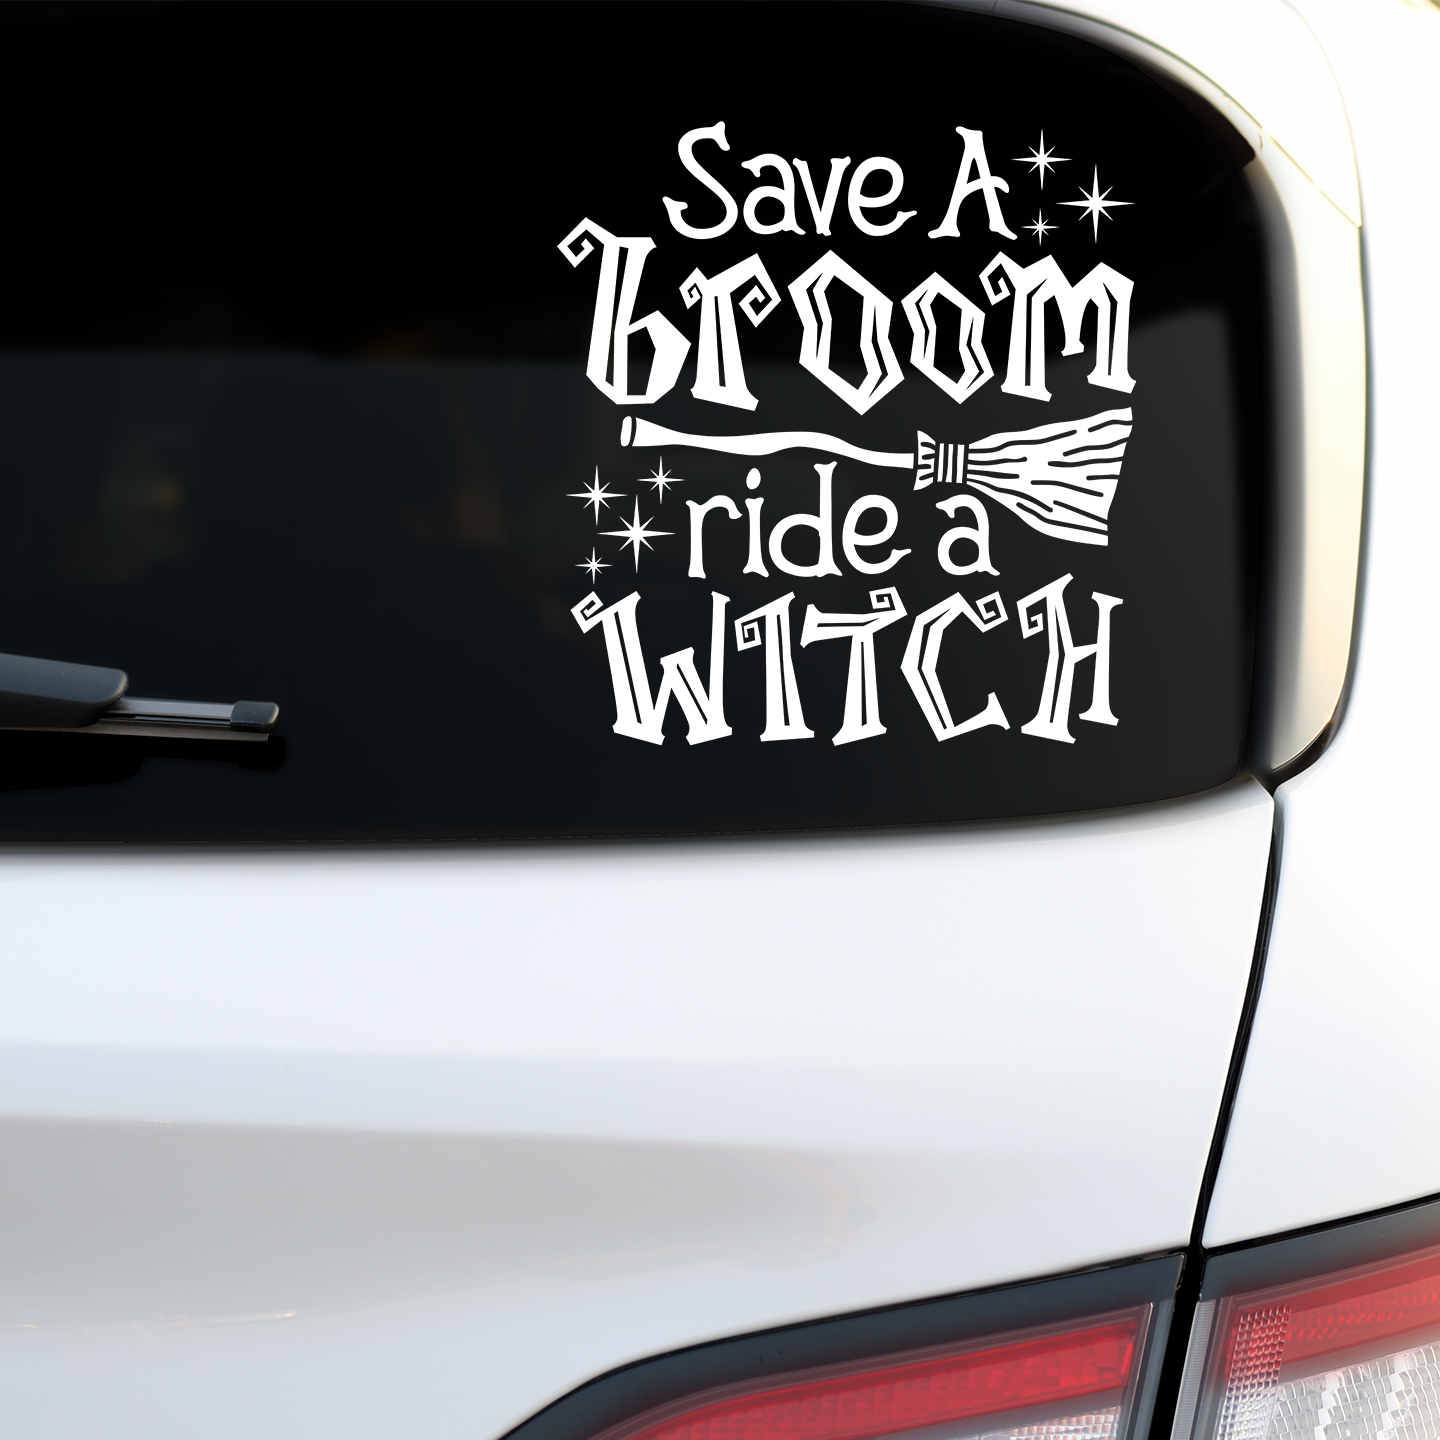 Save A Broom Ride A Witch Sticker